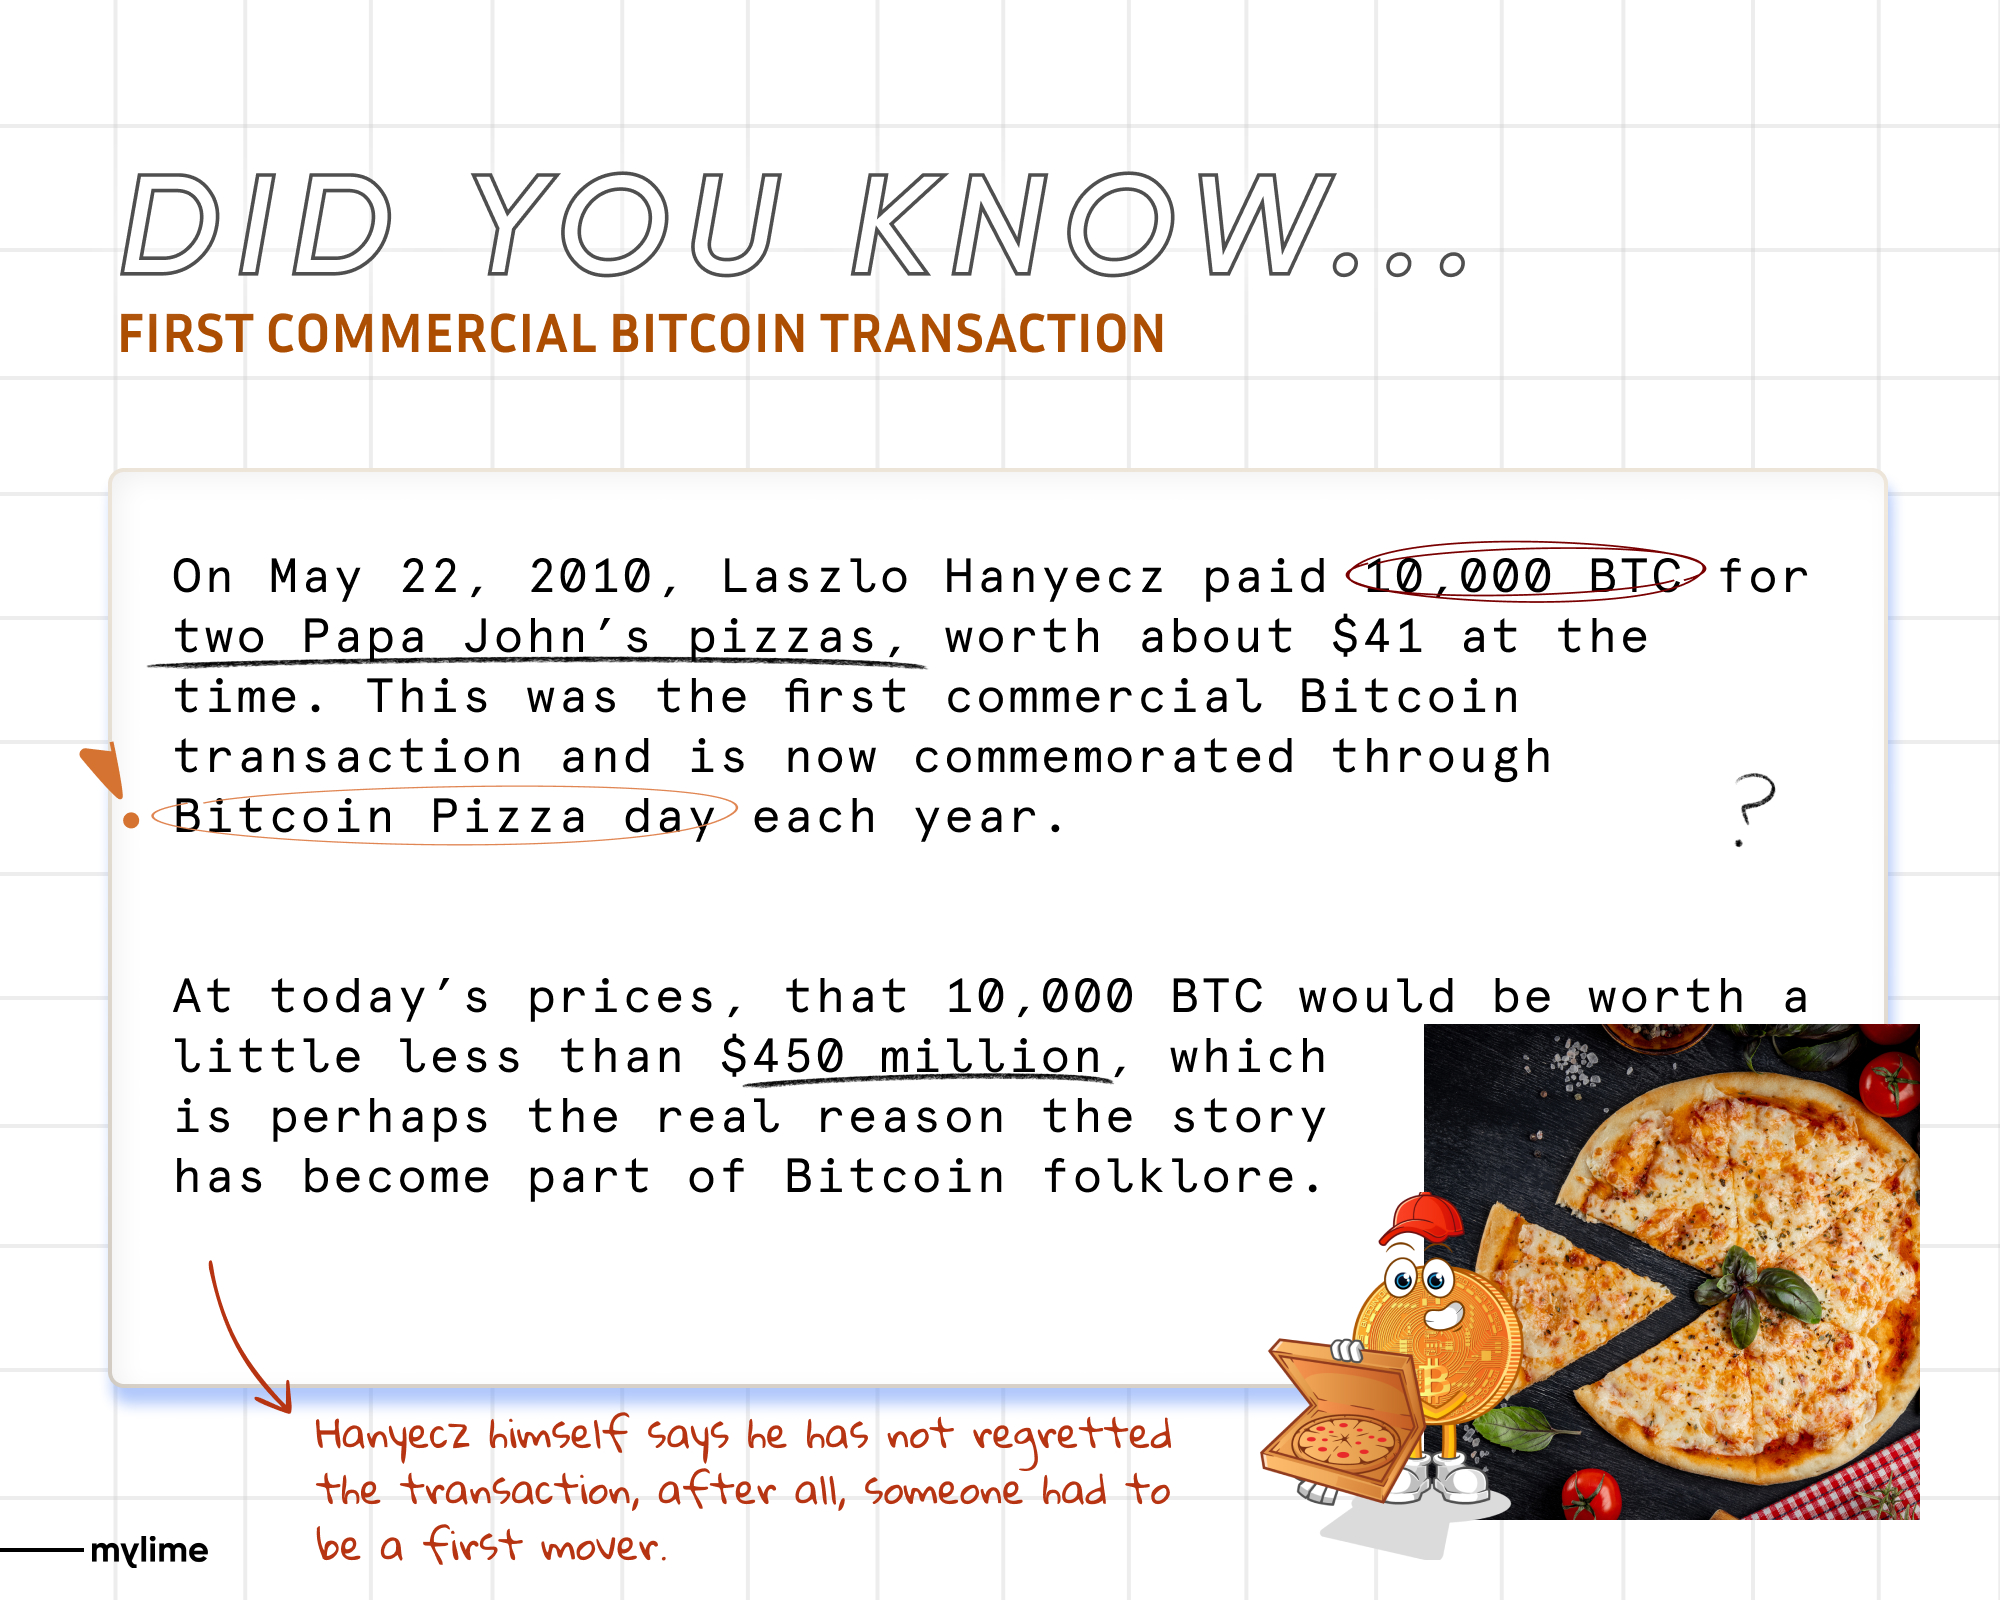 very first bitcoin transaction